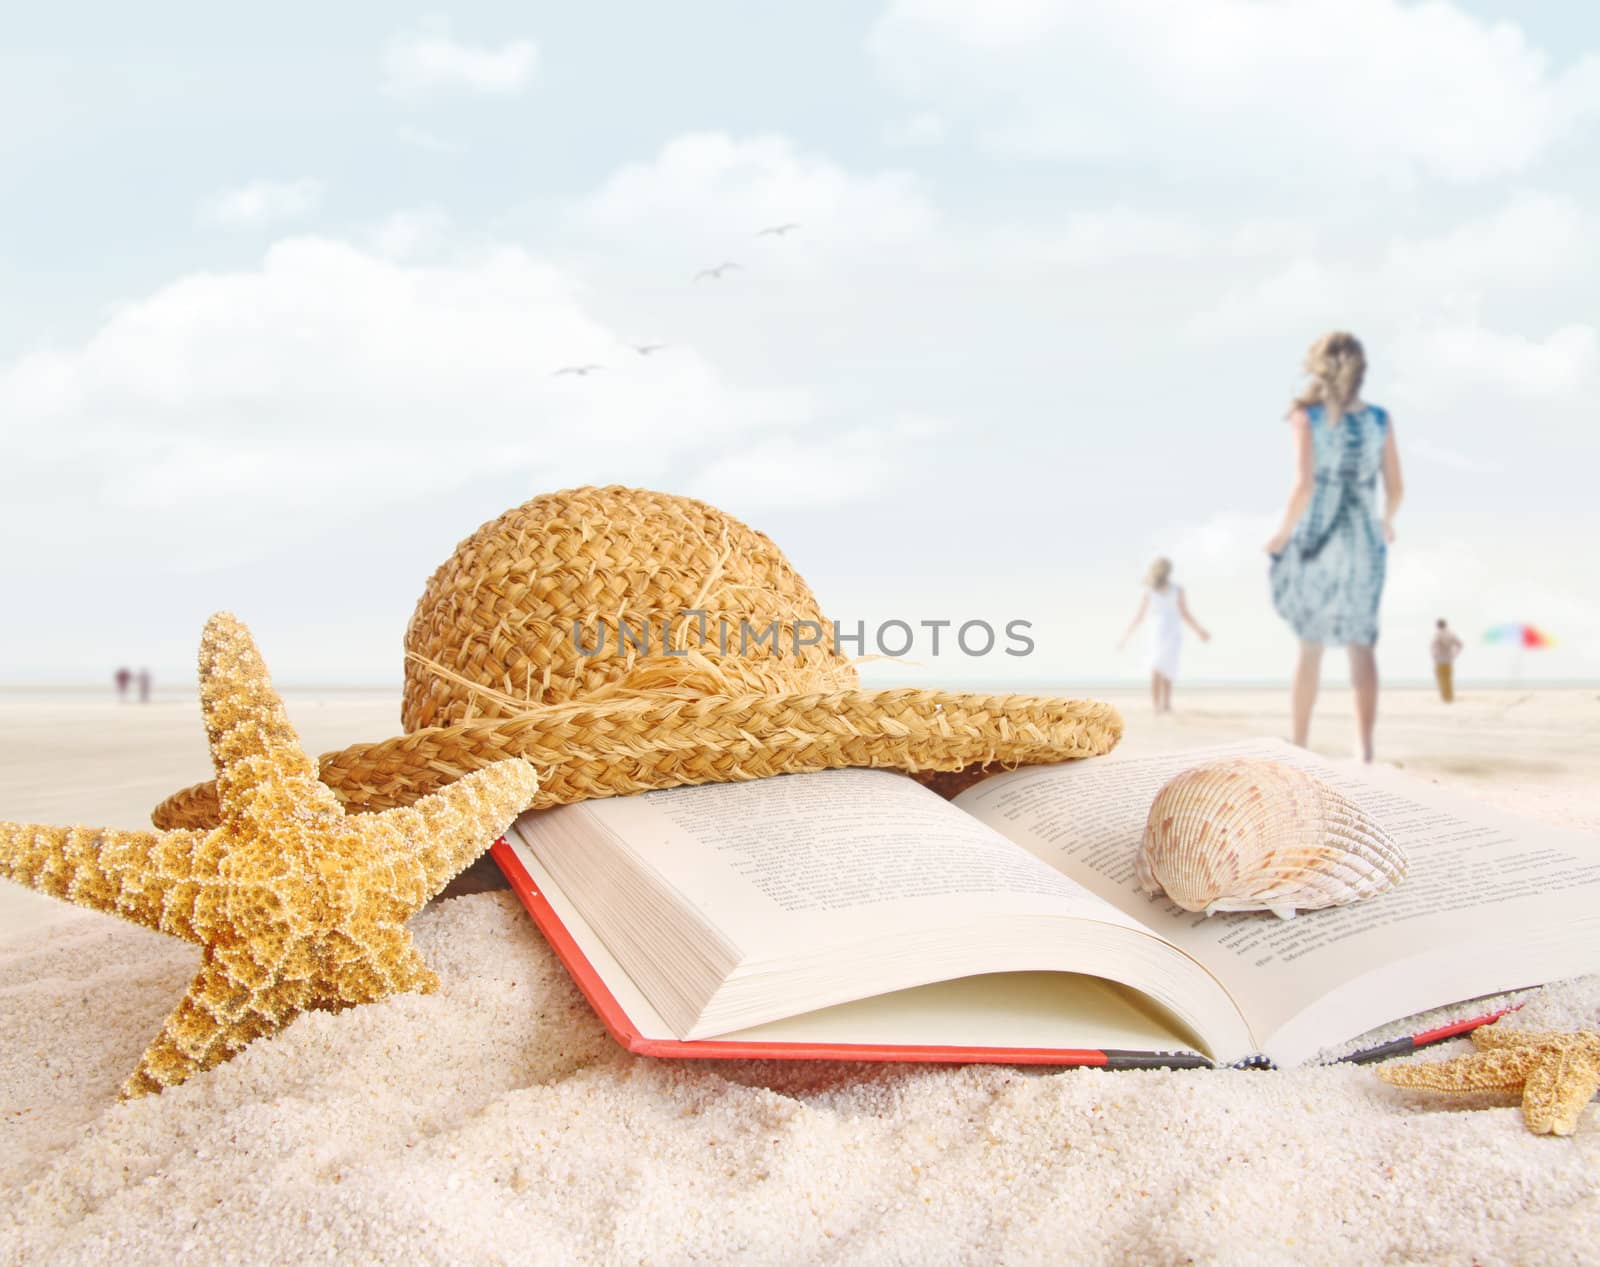 Straw hat , book and seashells on the beach with people walking